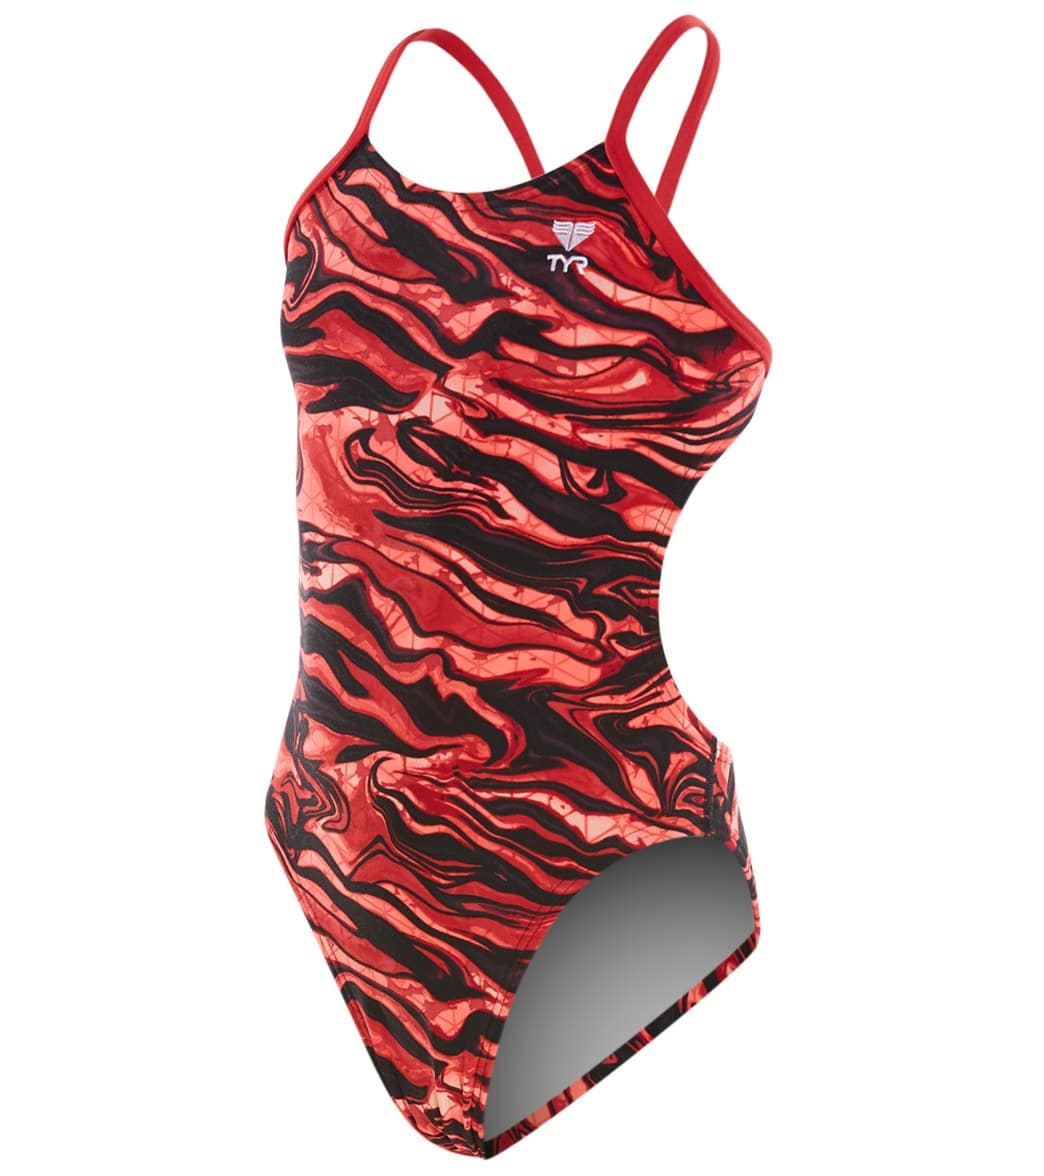 TYR Girls' Miramar Cutoutfit One Piece Swimsuit - Red 22 Polyester/Spandex - Swimoutlet.com